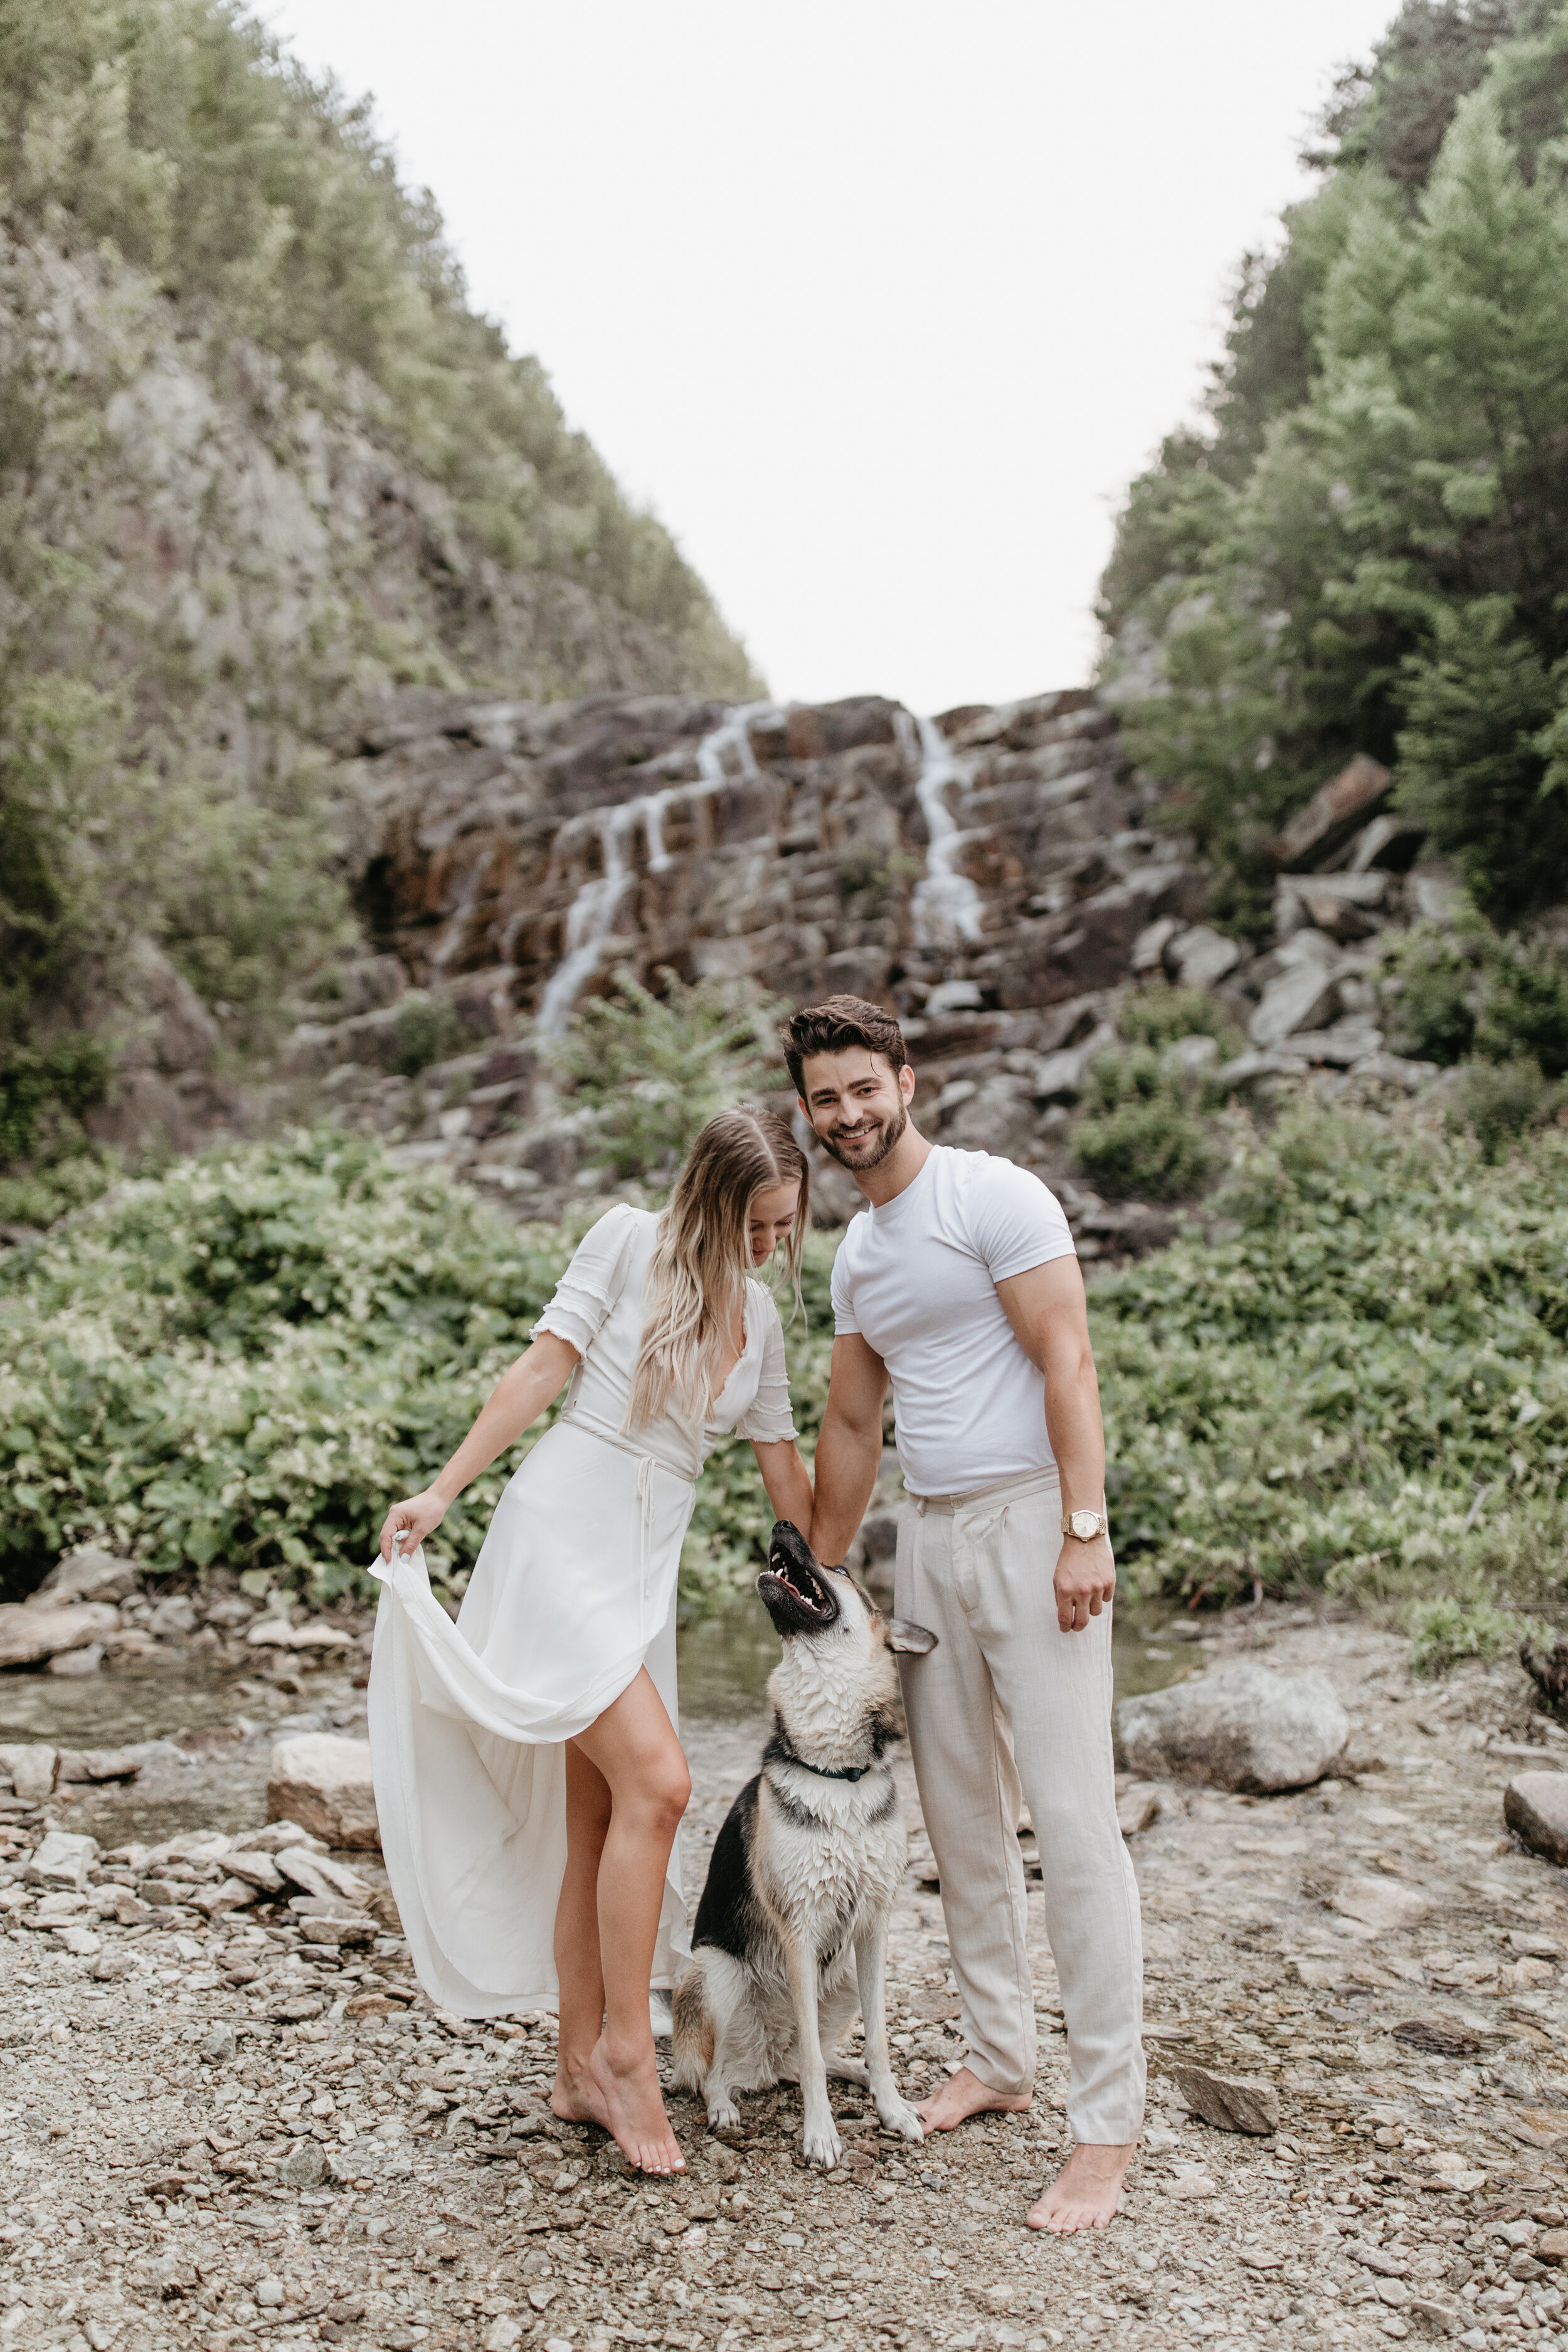 Nicole-Daacke-Photography-michaux-state-forest-elopement-adventure-engagement-session-pennsylvania-elopement-pa-elopement-photographer-gettysburg-photographer-state-park-elopement-engagement-session-pennsylvania-waterfall-171.jpg